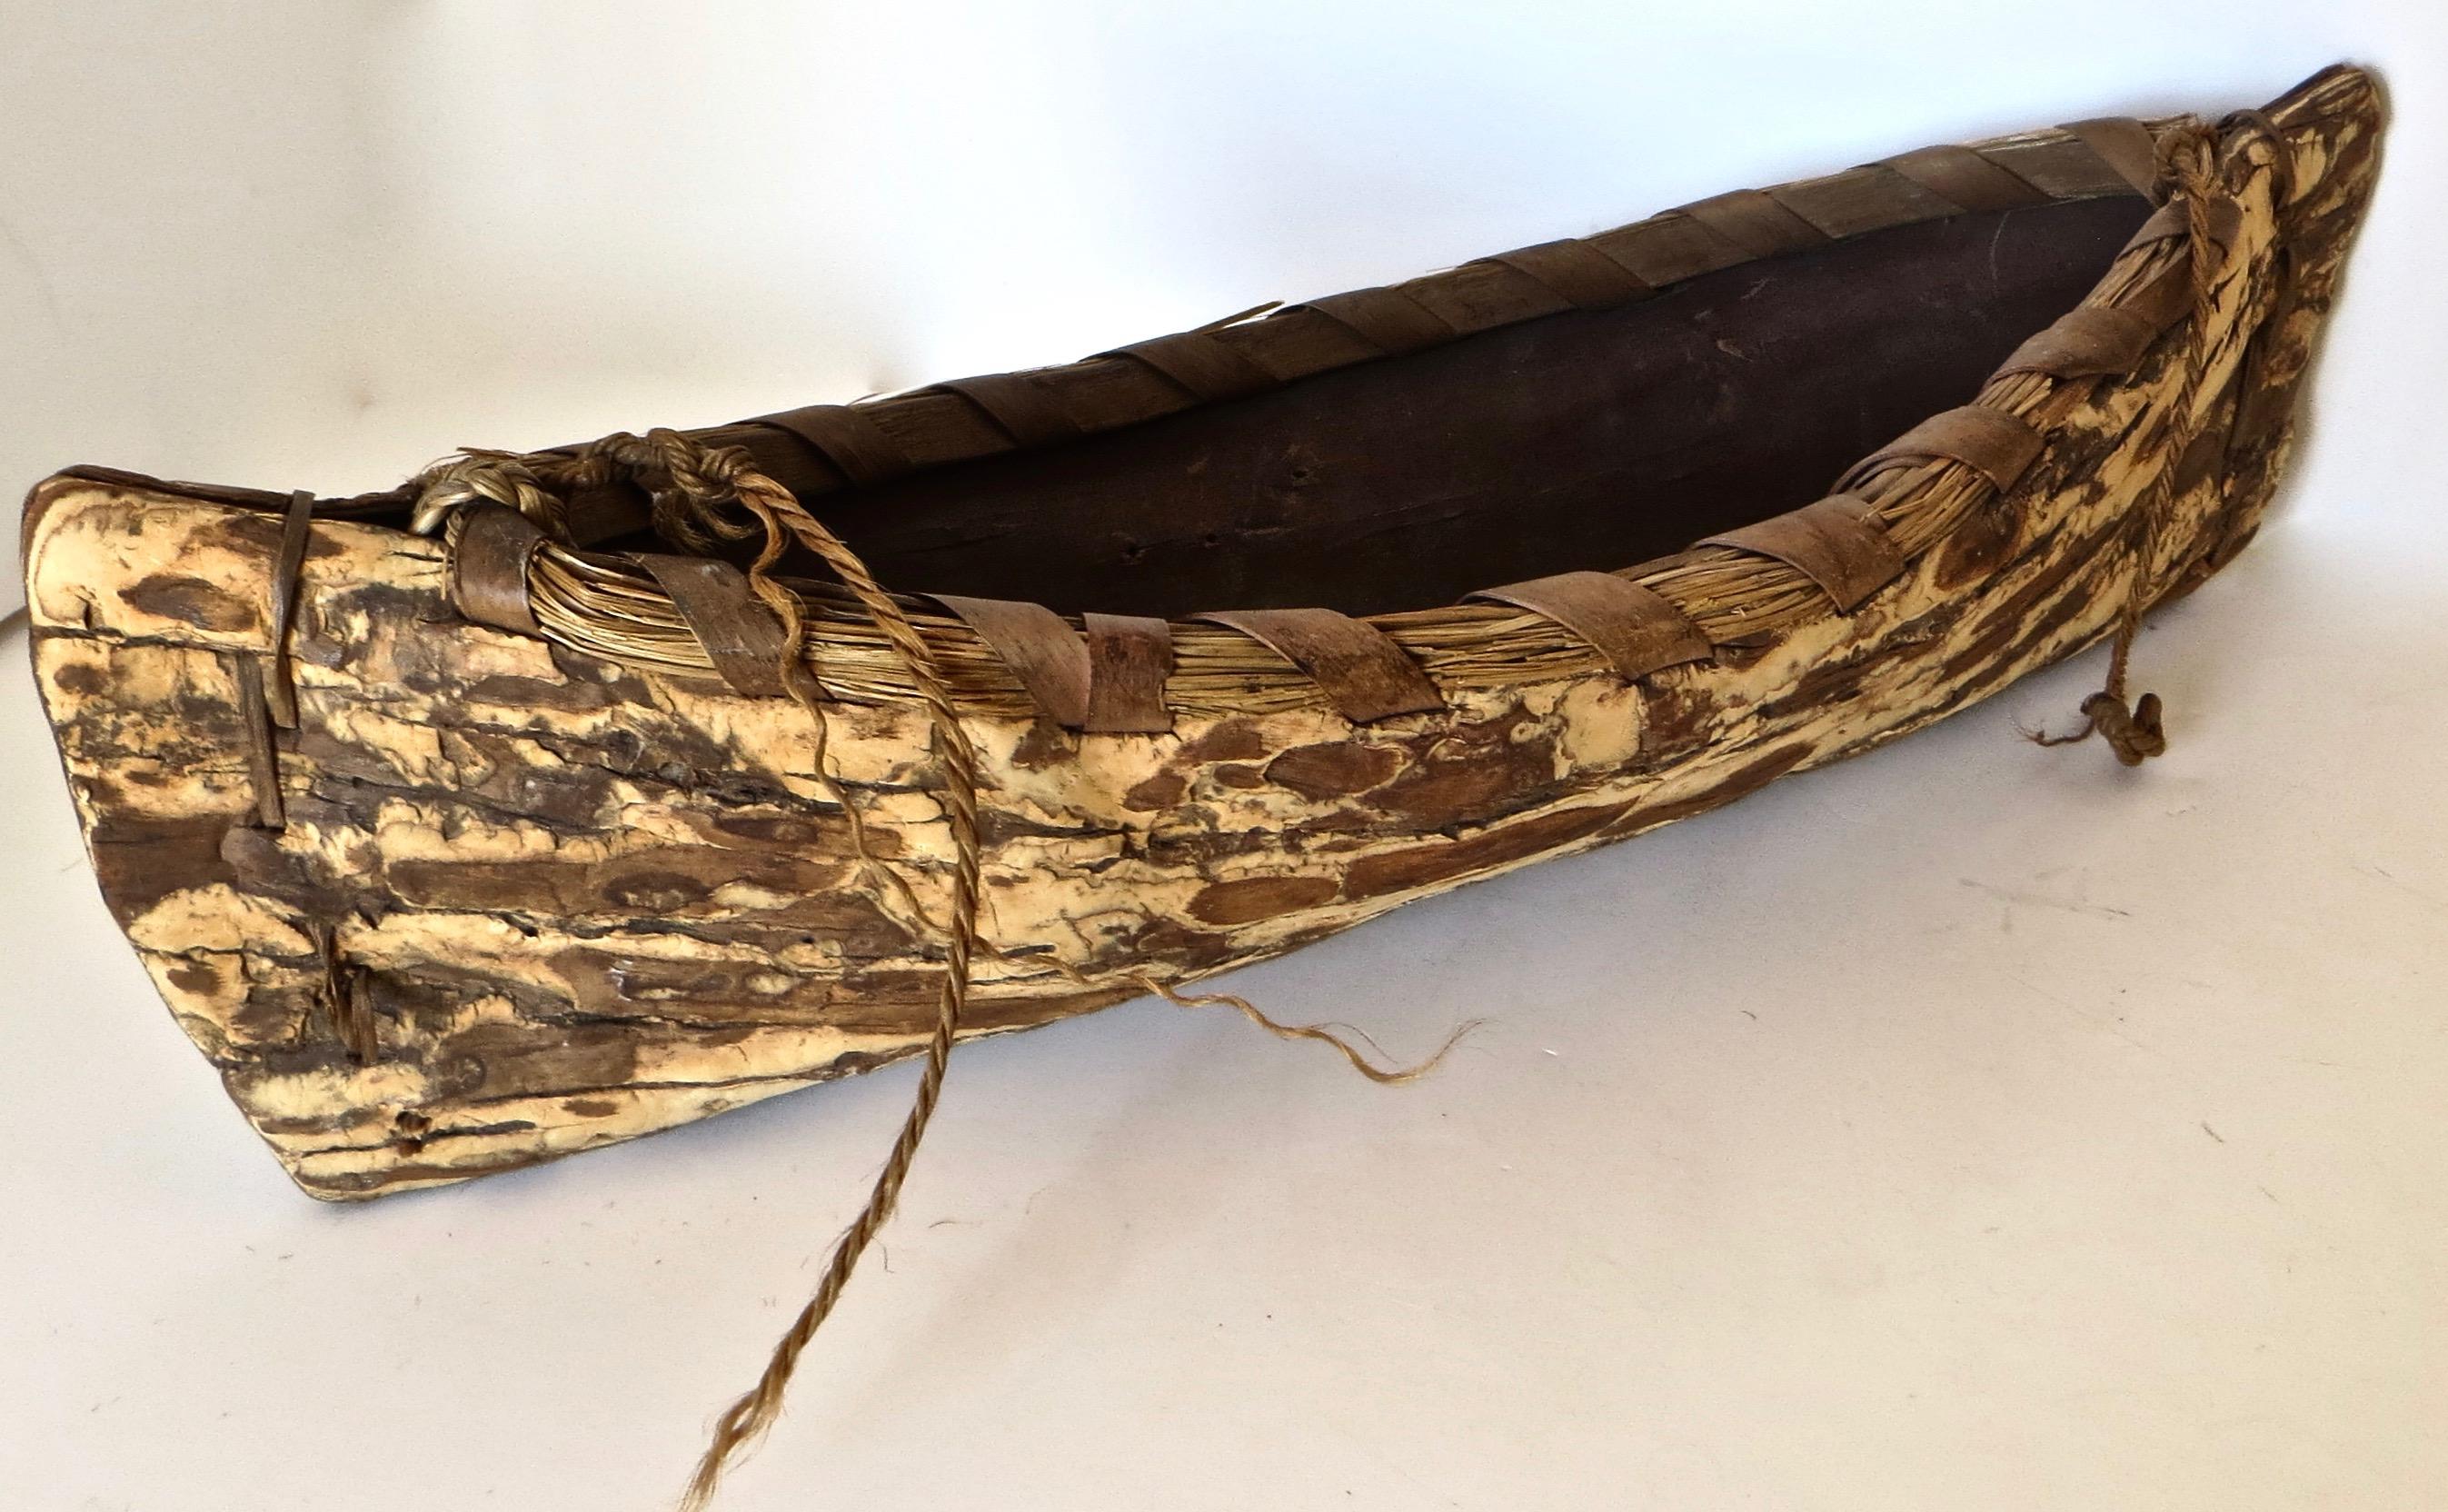 Pre-war Folk Art dugout canoe is made of spruce bark, and carved by the Iroquois Indian tribe, the indigenous people of the Eastern Woodlands to the south of Lake Ontario in the Great Lakes region. The exterior is natural tan and brown in color with